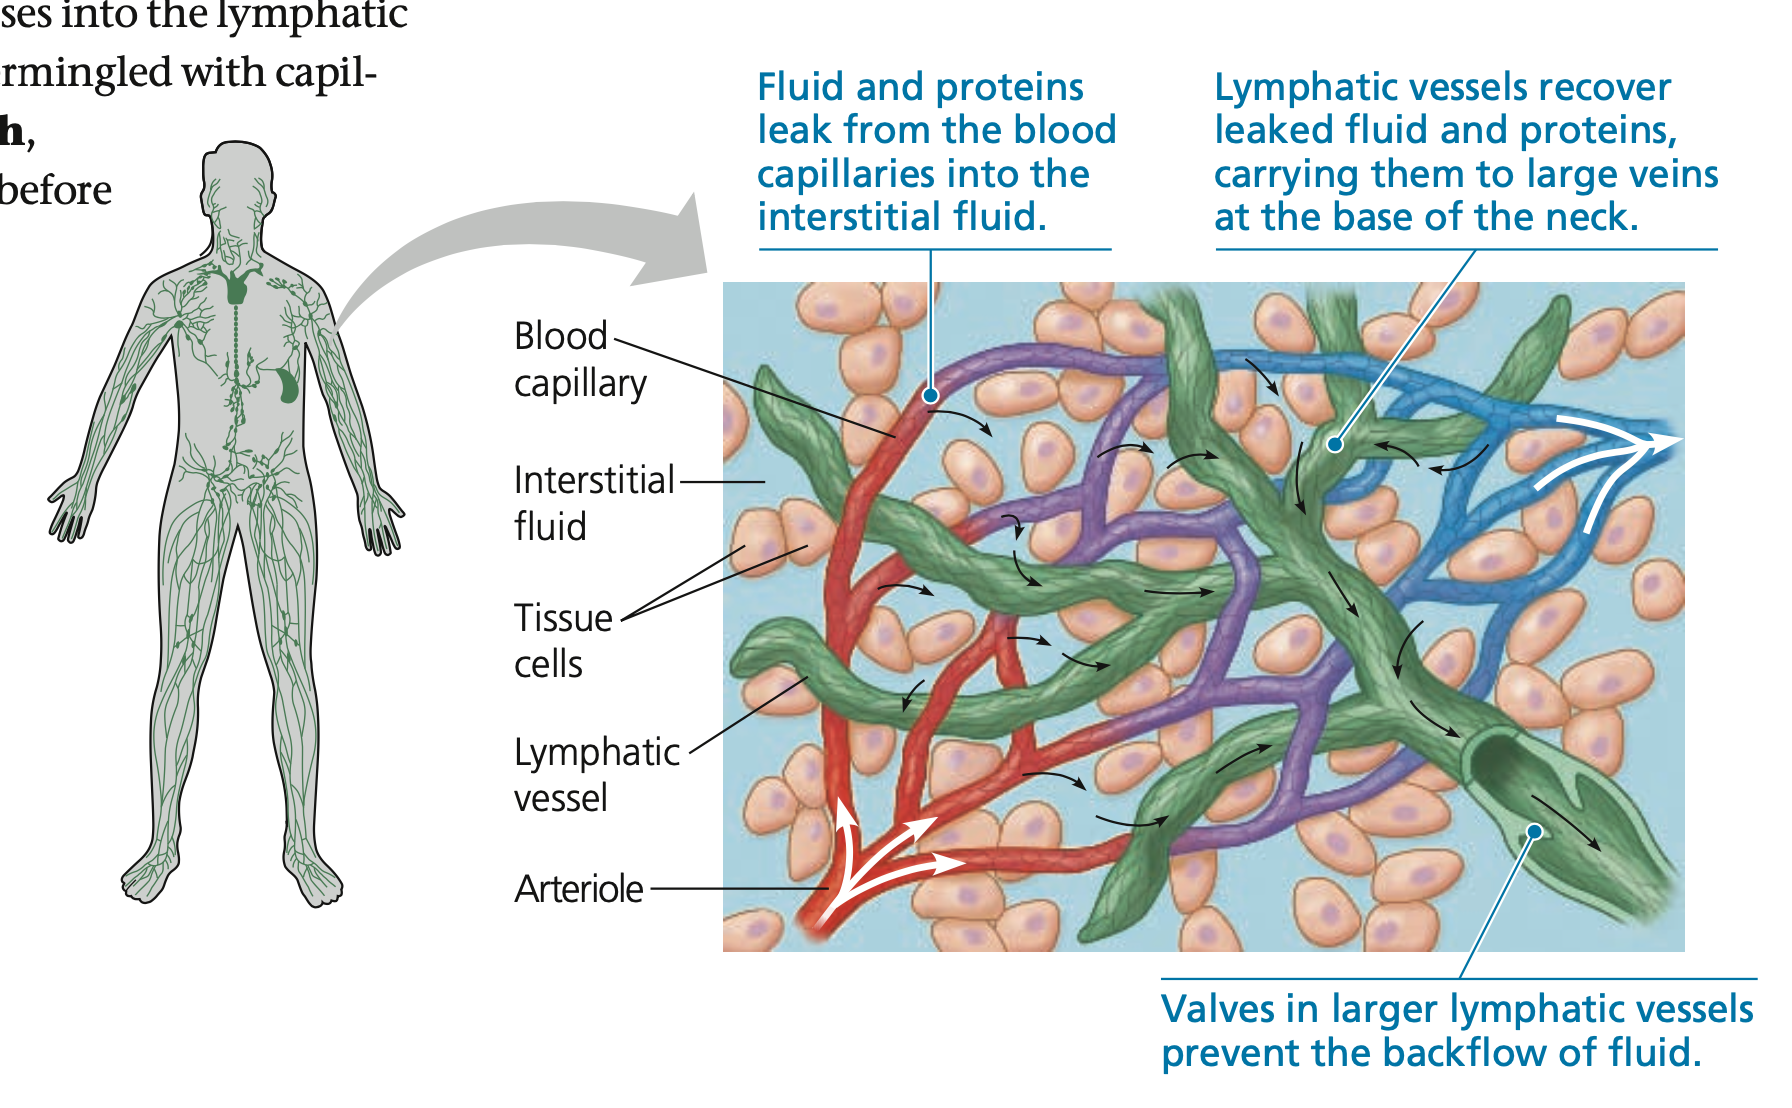 <p><strong>Fluid Return by Lymphatic System</strong></p><ul><li><p>adult human body loses <strong>~4–8 L of fluid</strong> from capillaries to the surrounding tissues</p><ul><li><p>Also a bit of leakage of blood proteins</p></li></ul></li><li><p><strong>Lymphatic system</strong> recovers and returns lost fluid, through ______ vessels intermingled with capillaries</p></li><li><p><strong>Lymph,</strong> the recovered fluid; circulates the lymphatic system before draining into large <strong>____ at the neck</strong></p><ul><li><p>Cardiovascular and lymphatic system joins to complete <strong>recovery of lymph</strong> and <strong>transfer of _____</strong> from small intestine to blood</p></li></ul></li><li><p>Movement of lymph in lymph vessels relies on mechanisms similar to that of the vein</p><ul><li><p>Lymph vessels also have <strong>____</strong> to prevent backflow</p></li><li><p>Rhythmic ______ also help draw in fluid</p></li><li><p>_____ contractions also assist in movement of lymph</p></li></ul></li></ul>